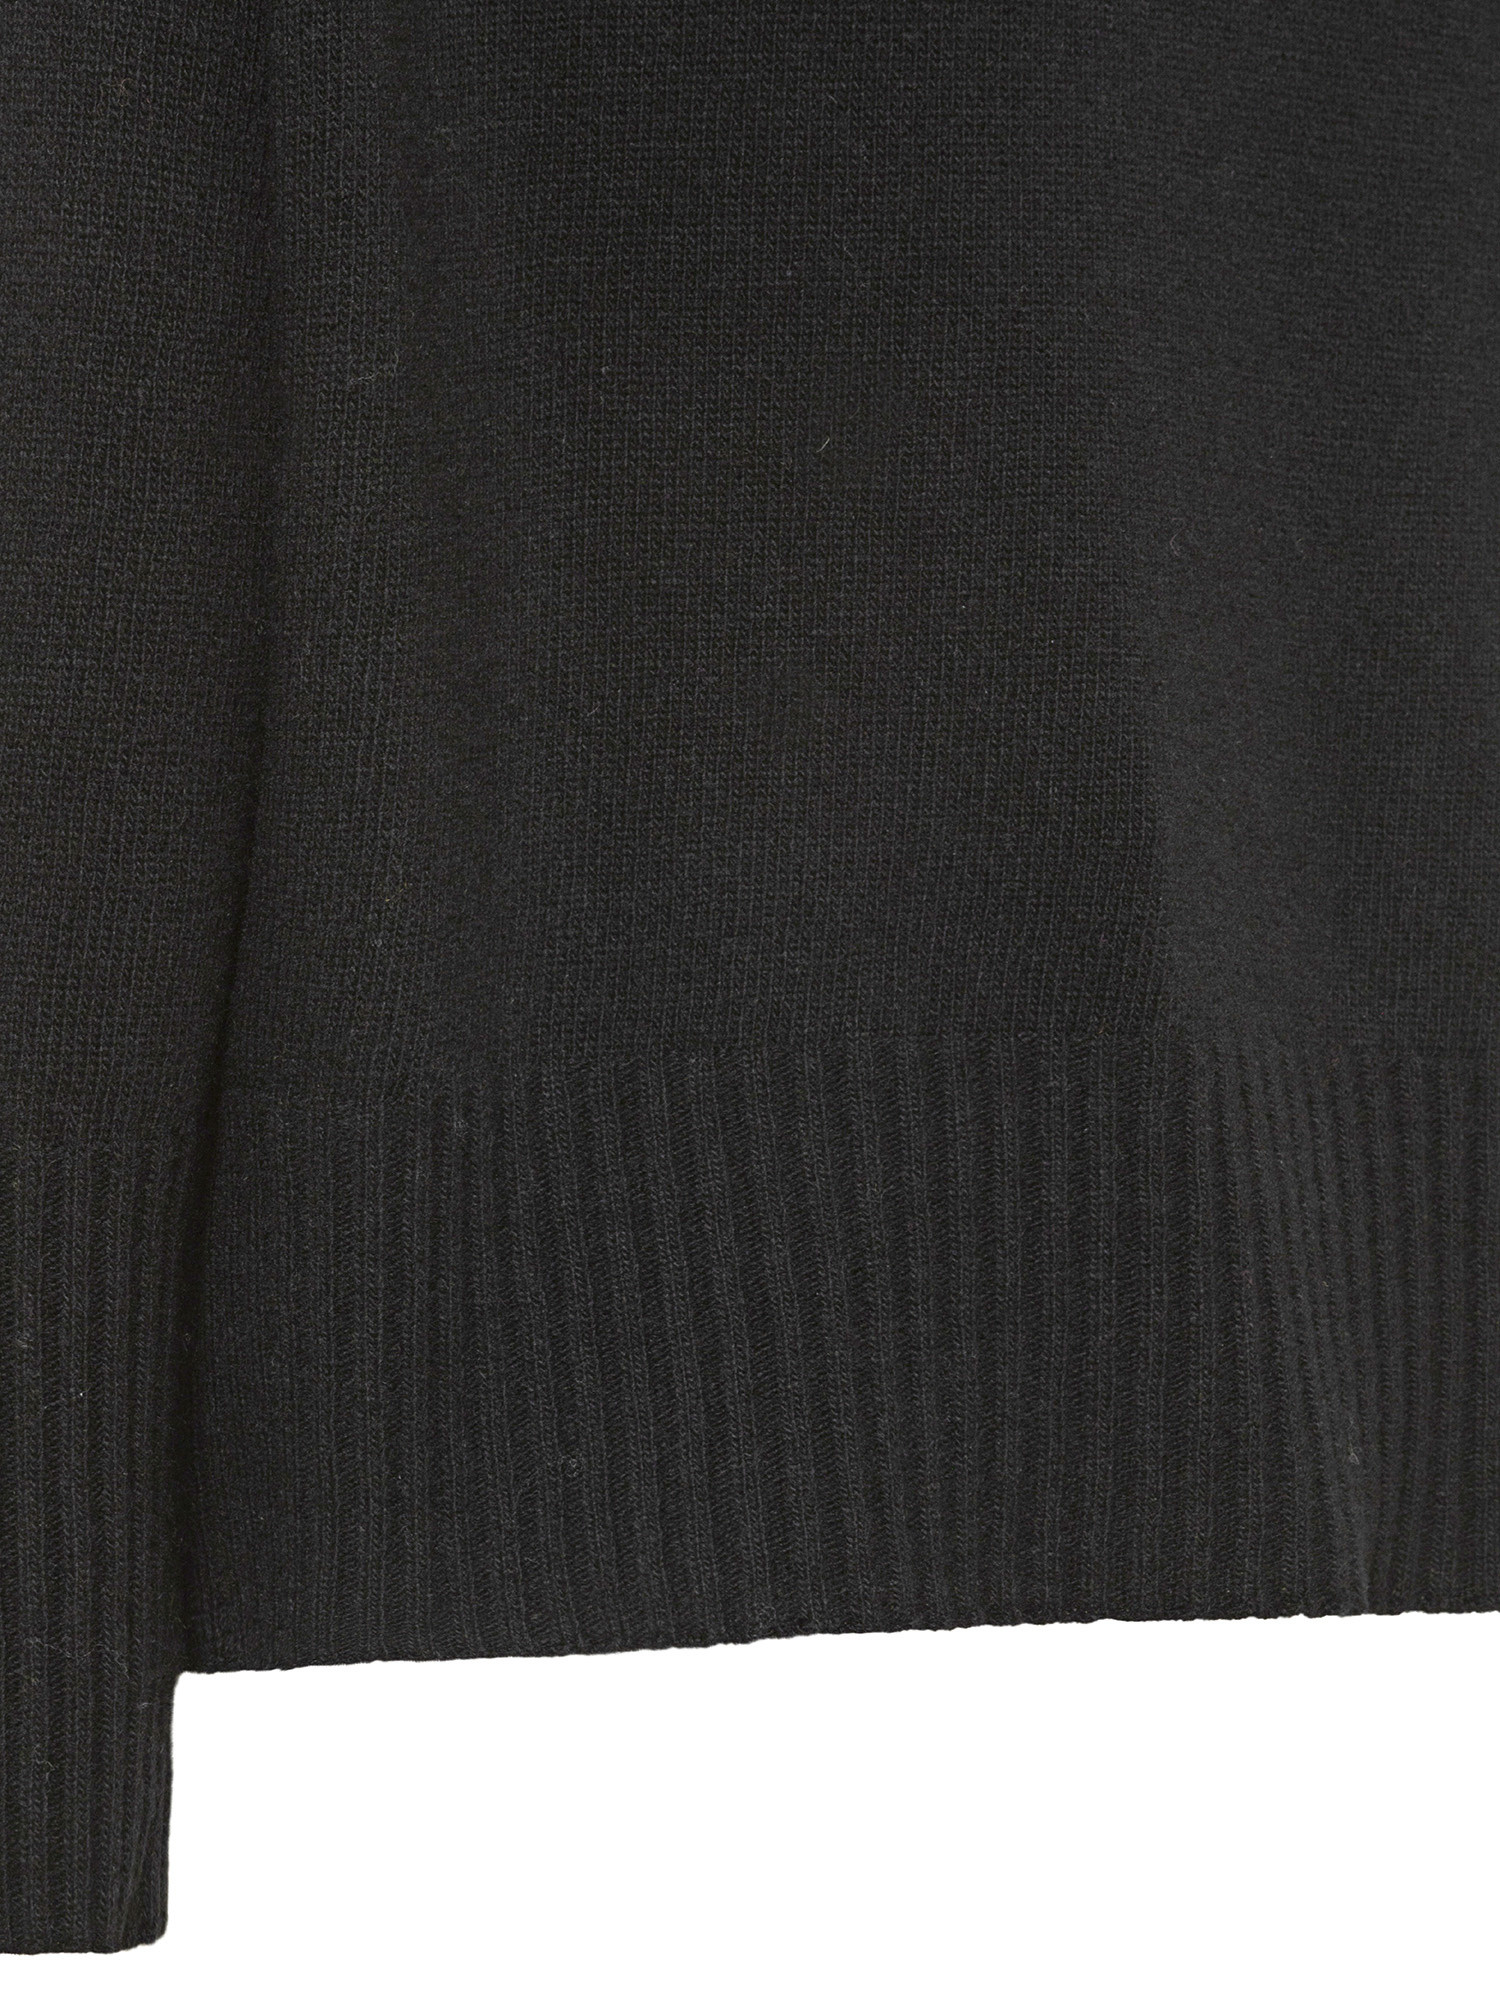 K Collection - Carded wool pullover, Black, large image number 2